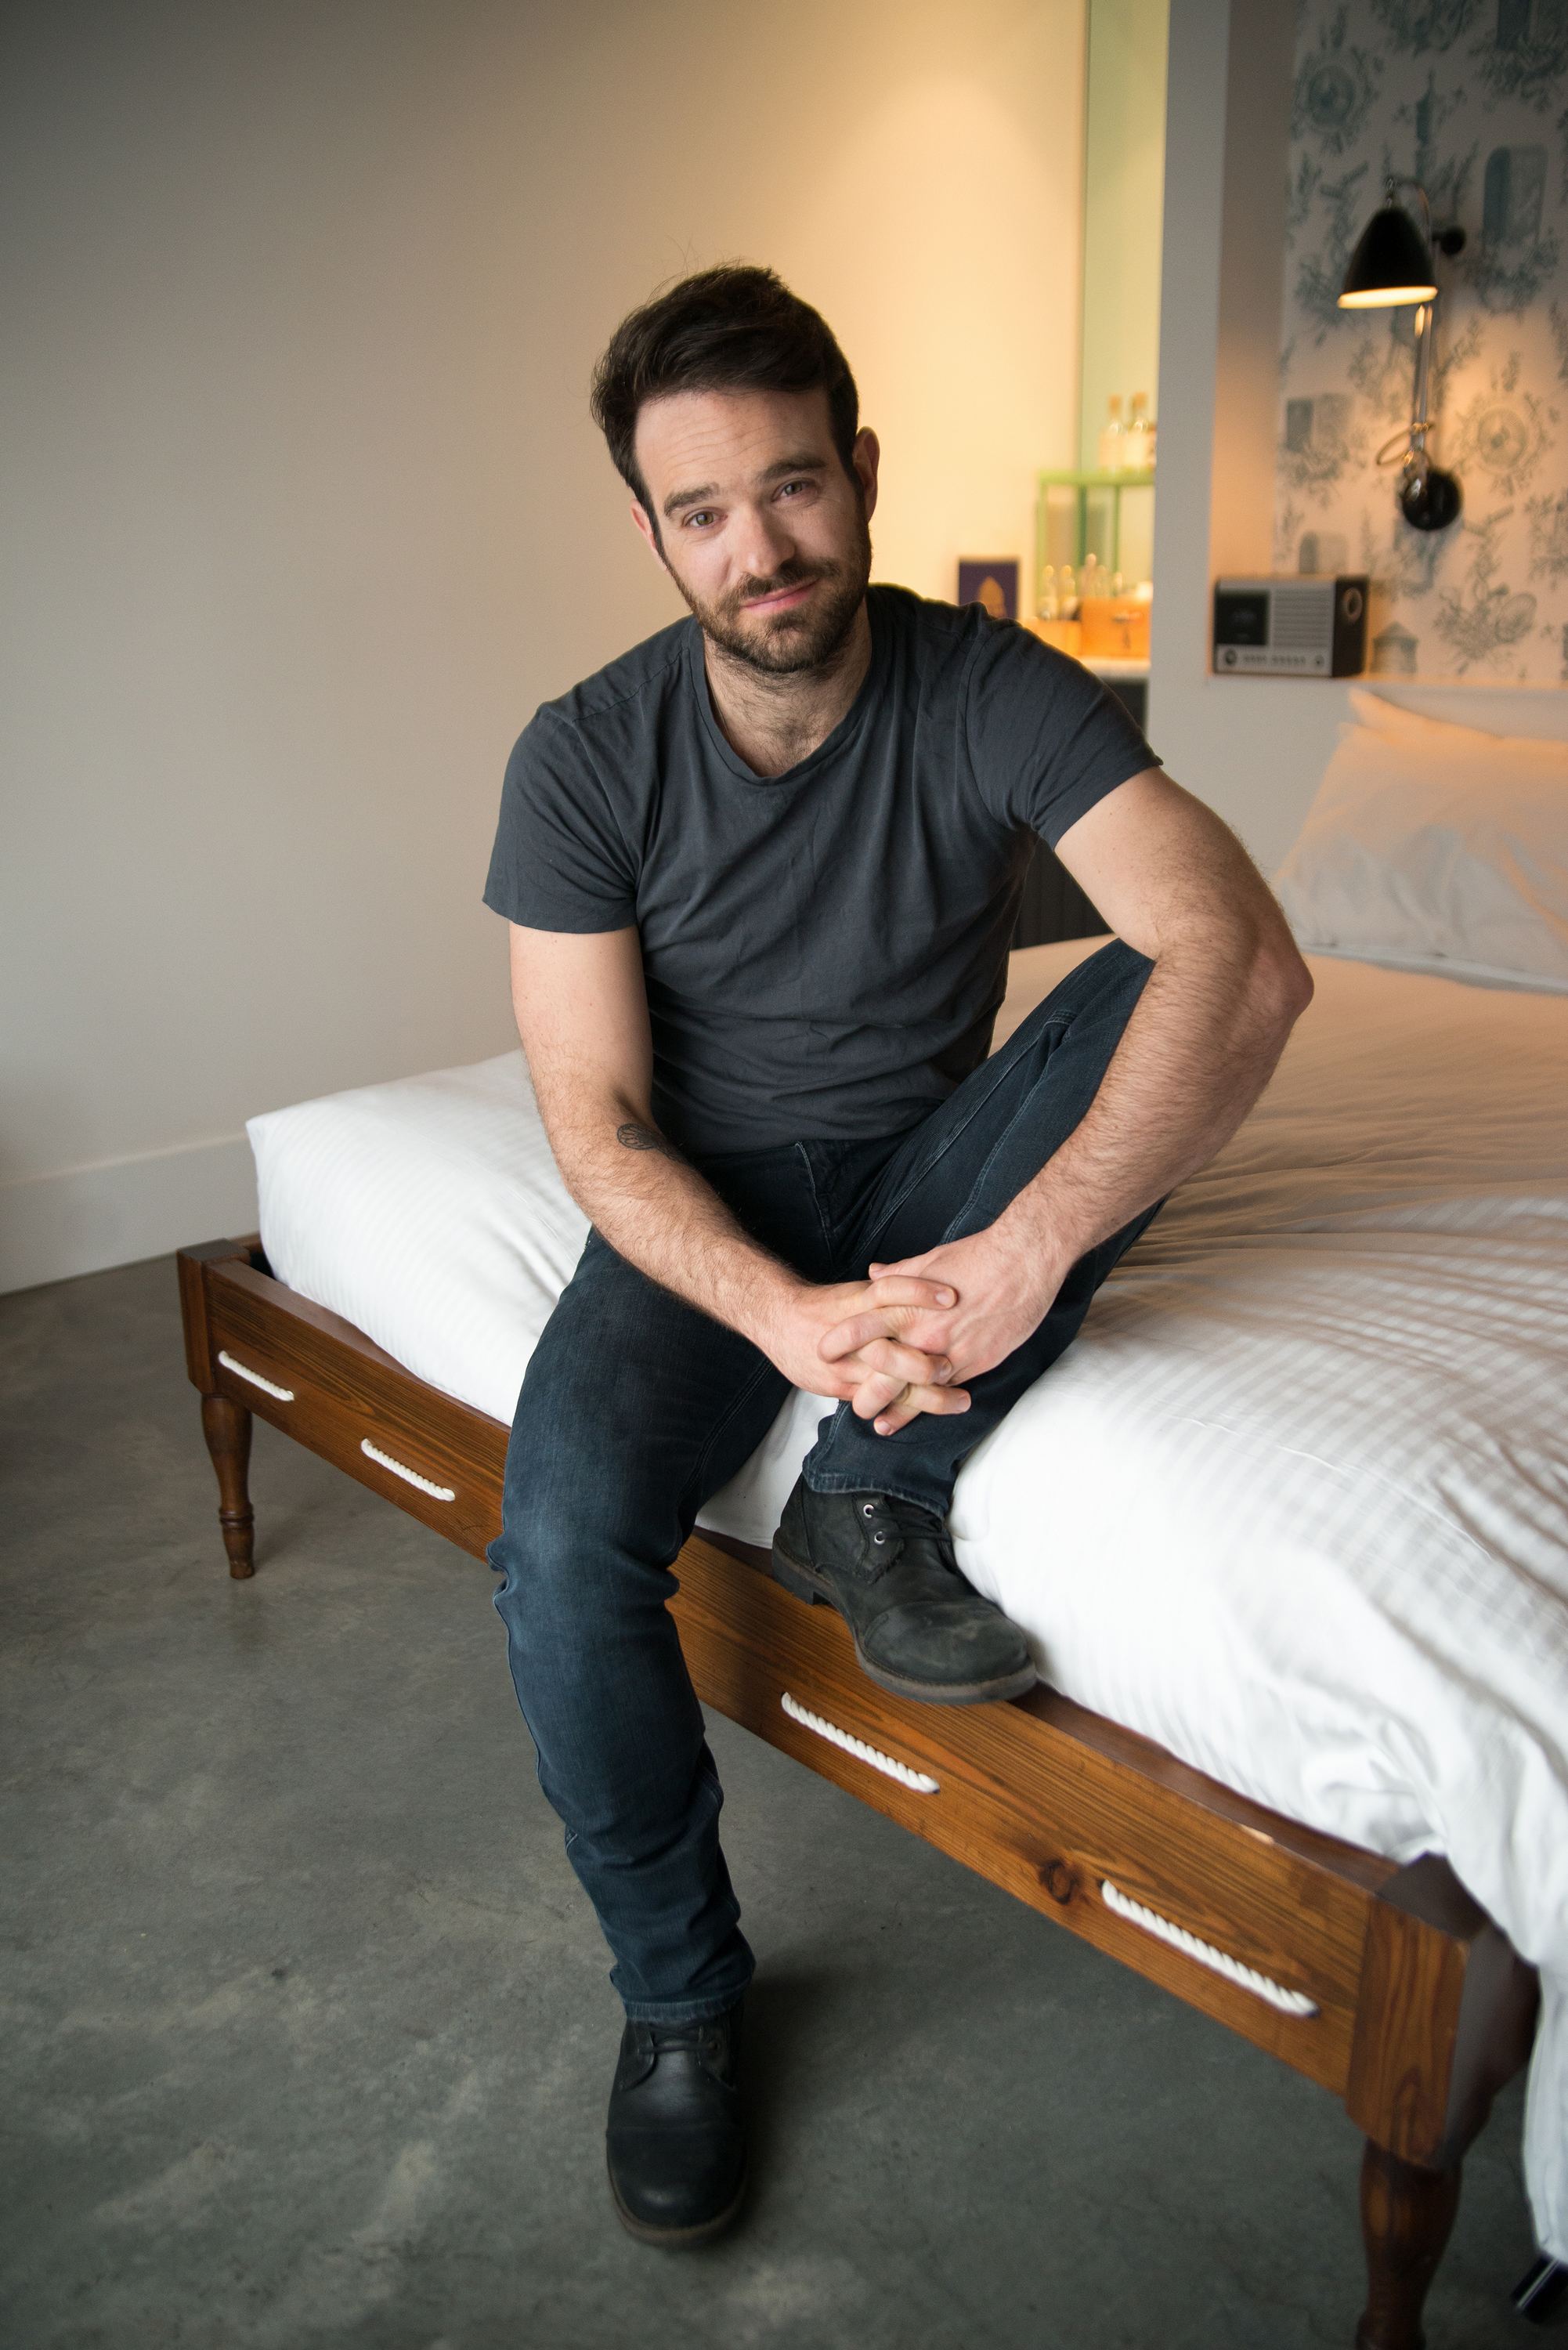 Charlie Cox Images on Fanpop.